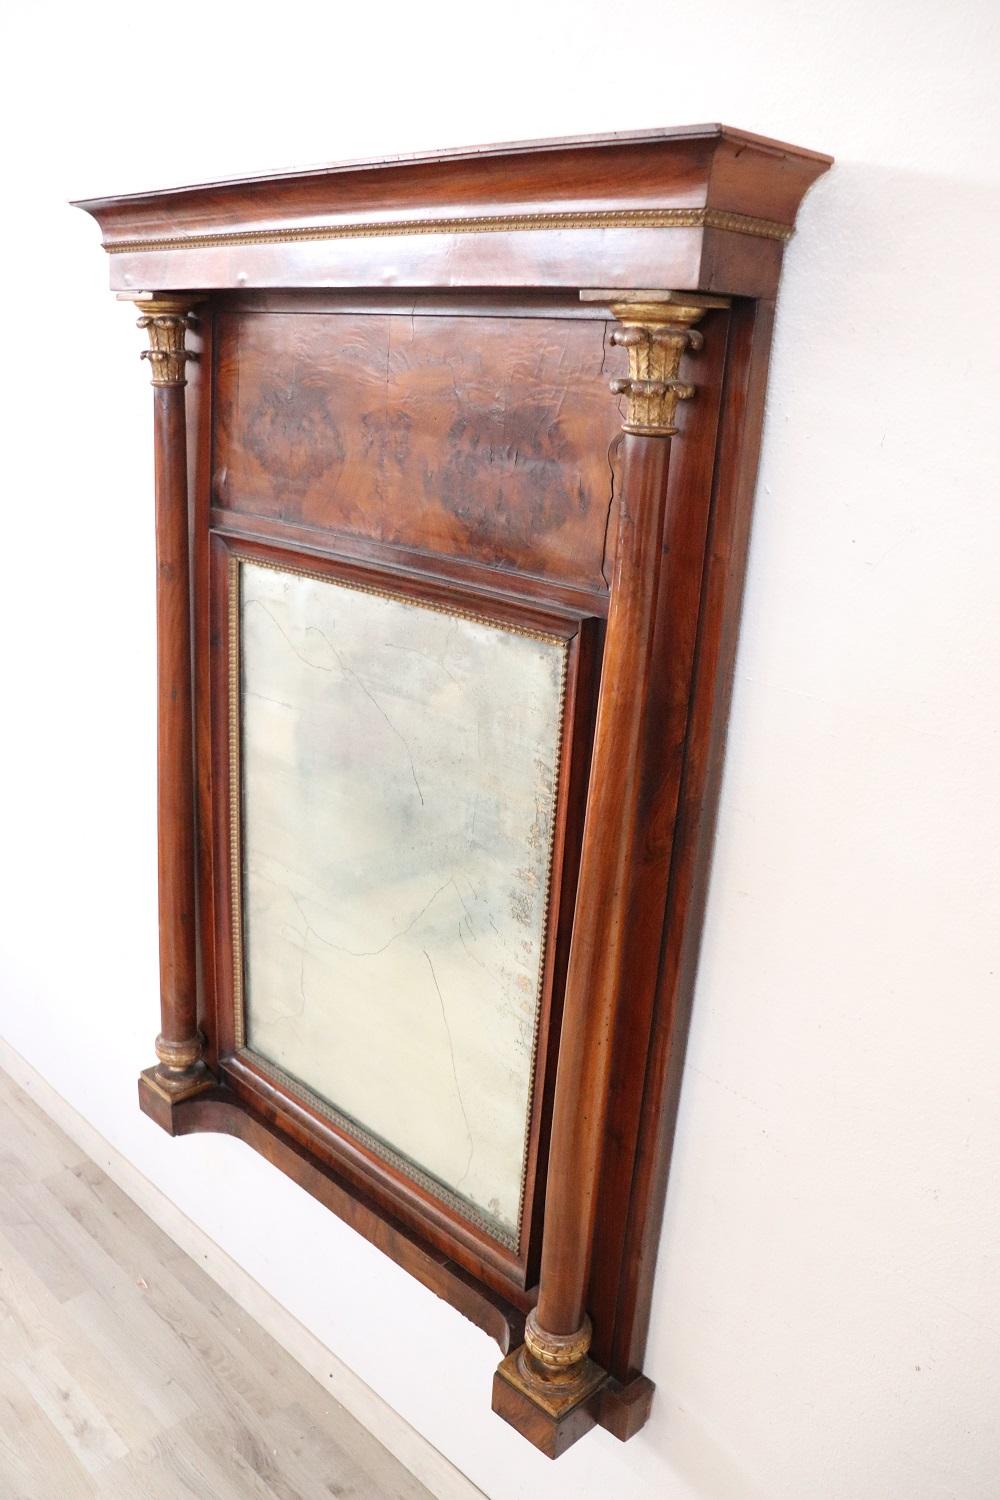 Beautiful elegant antique Empire wall mirror, 1800s walnut wood hand carved with finely decorations. Elegant carved and gilded decorations. On the sides two columns with gilded corinthian capitals. The mirror is original antique mercury. The